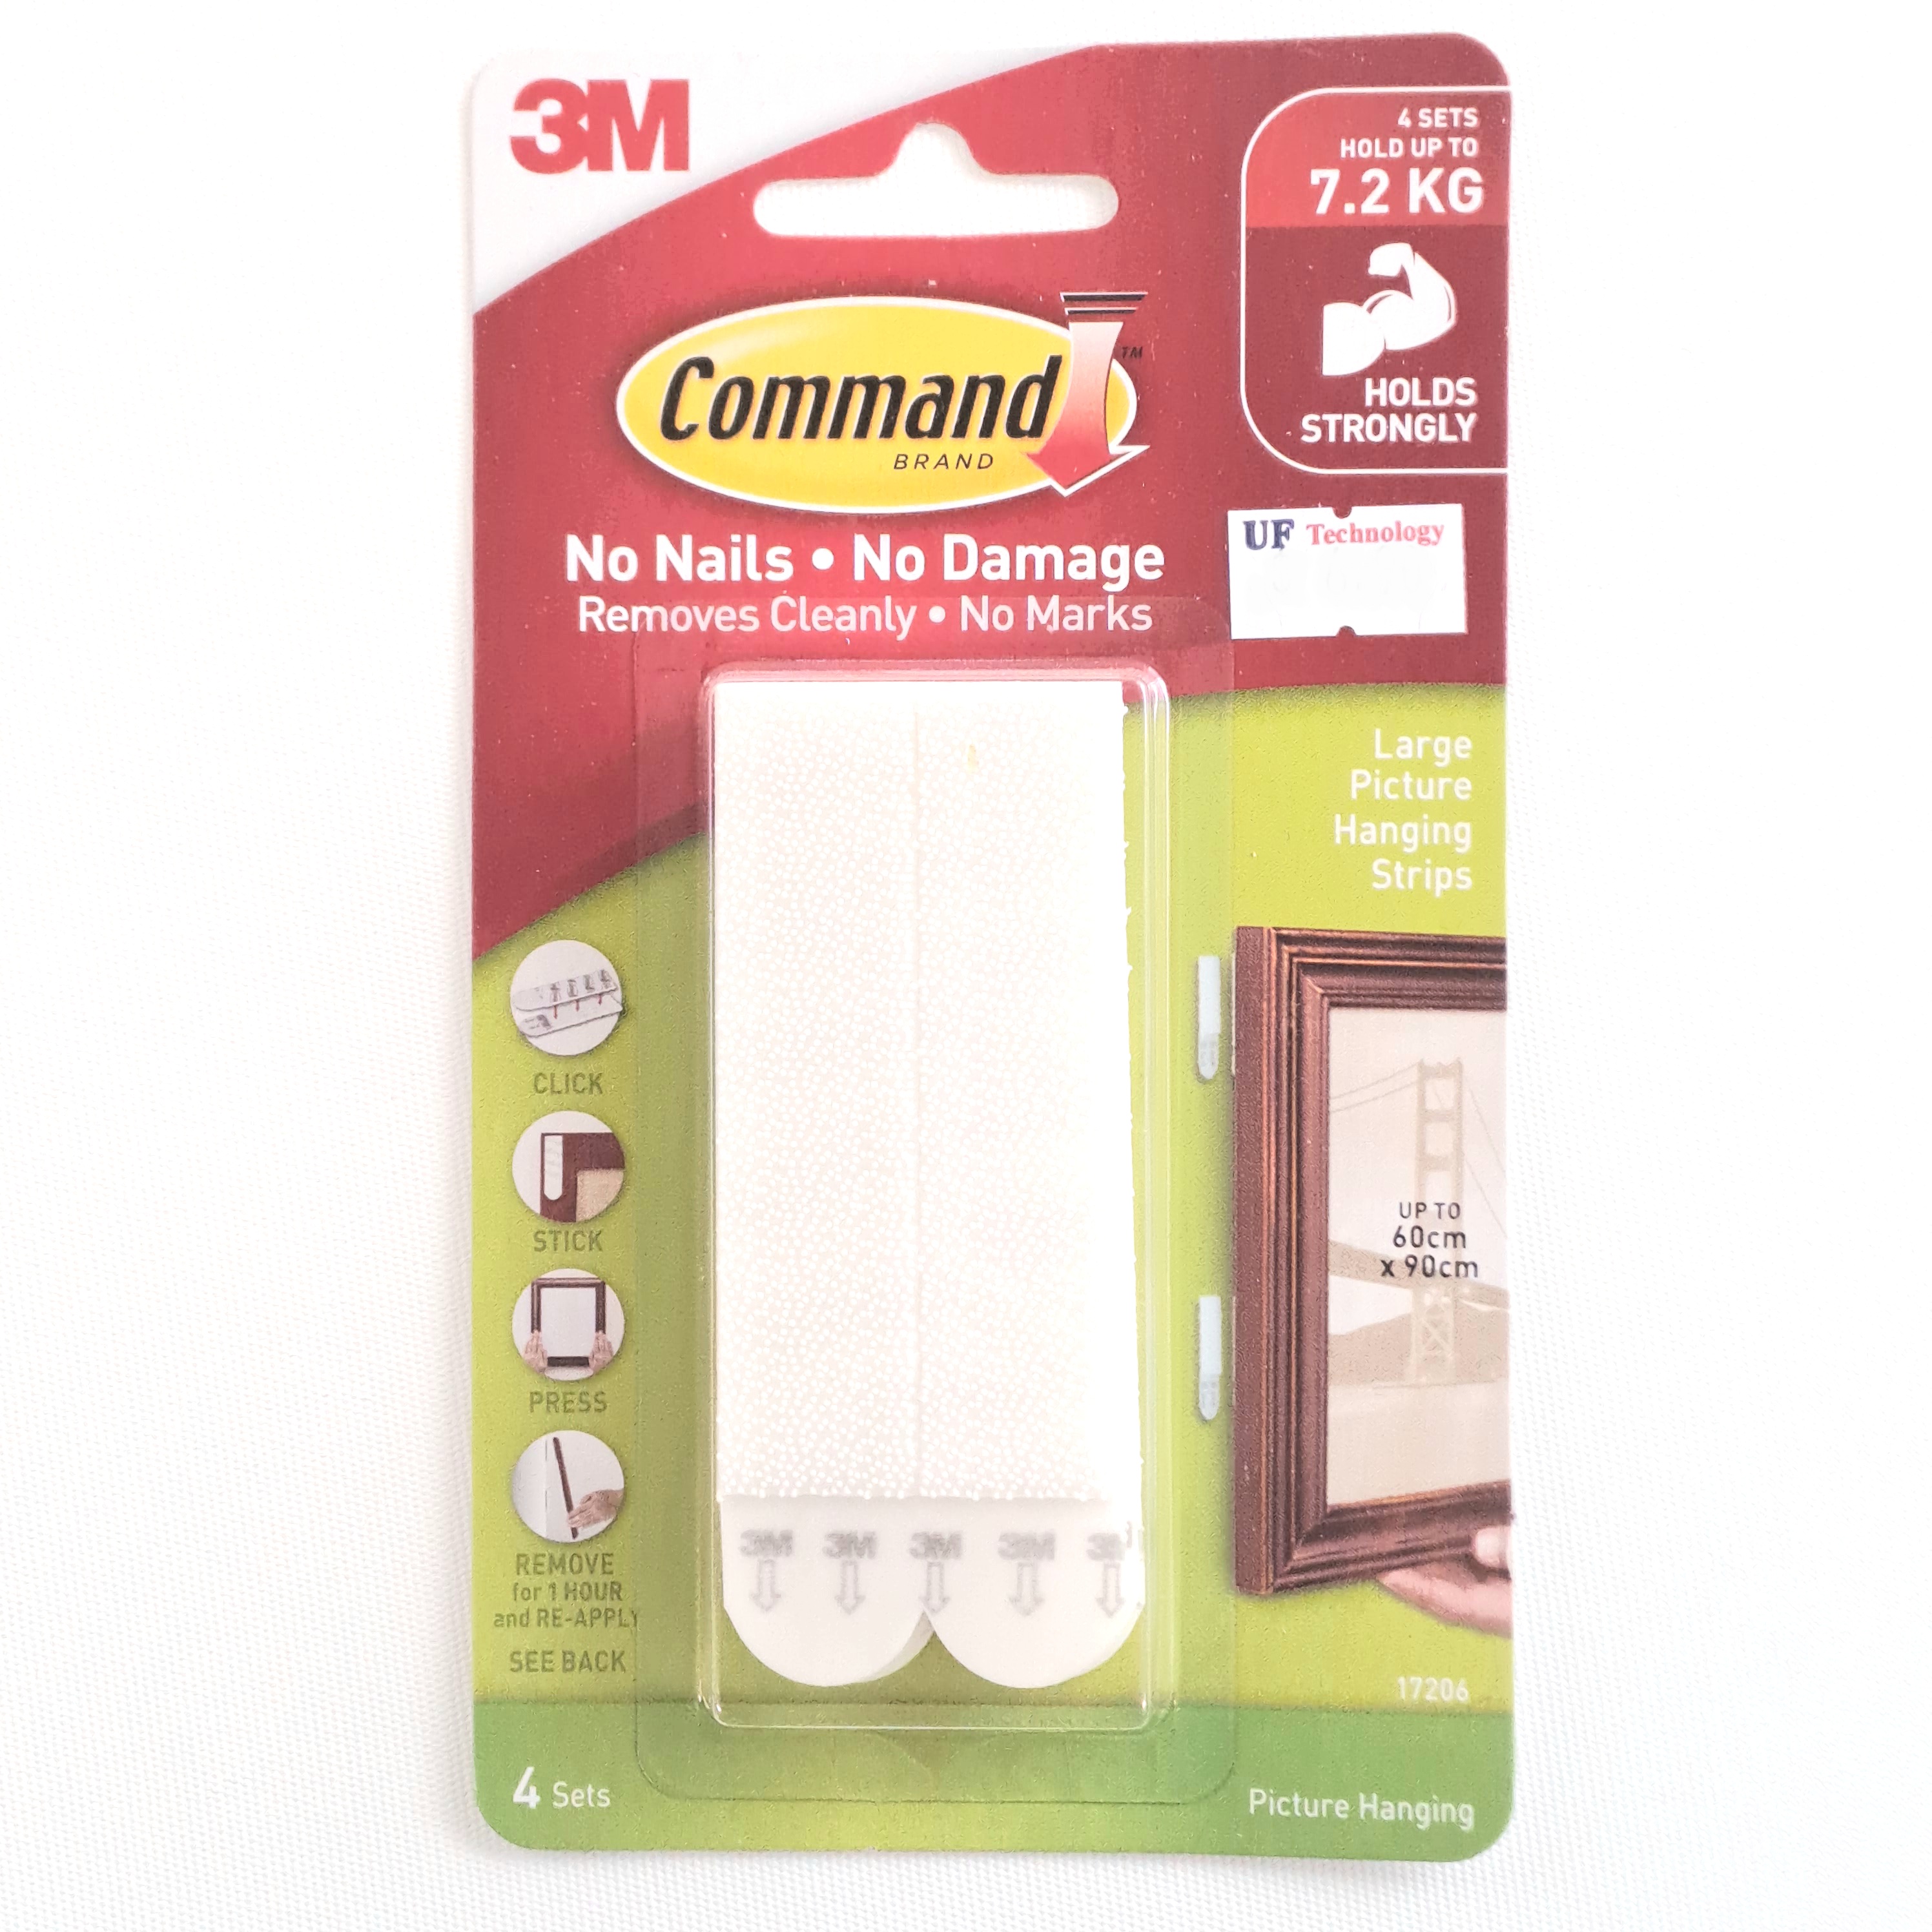 3M Command Large Picture Hanging Strips 4 Sets (22698)